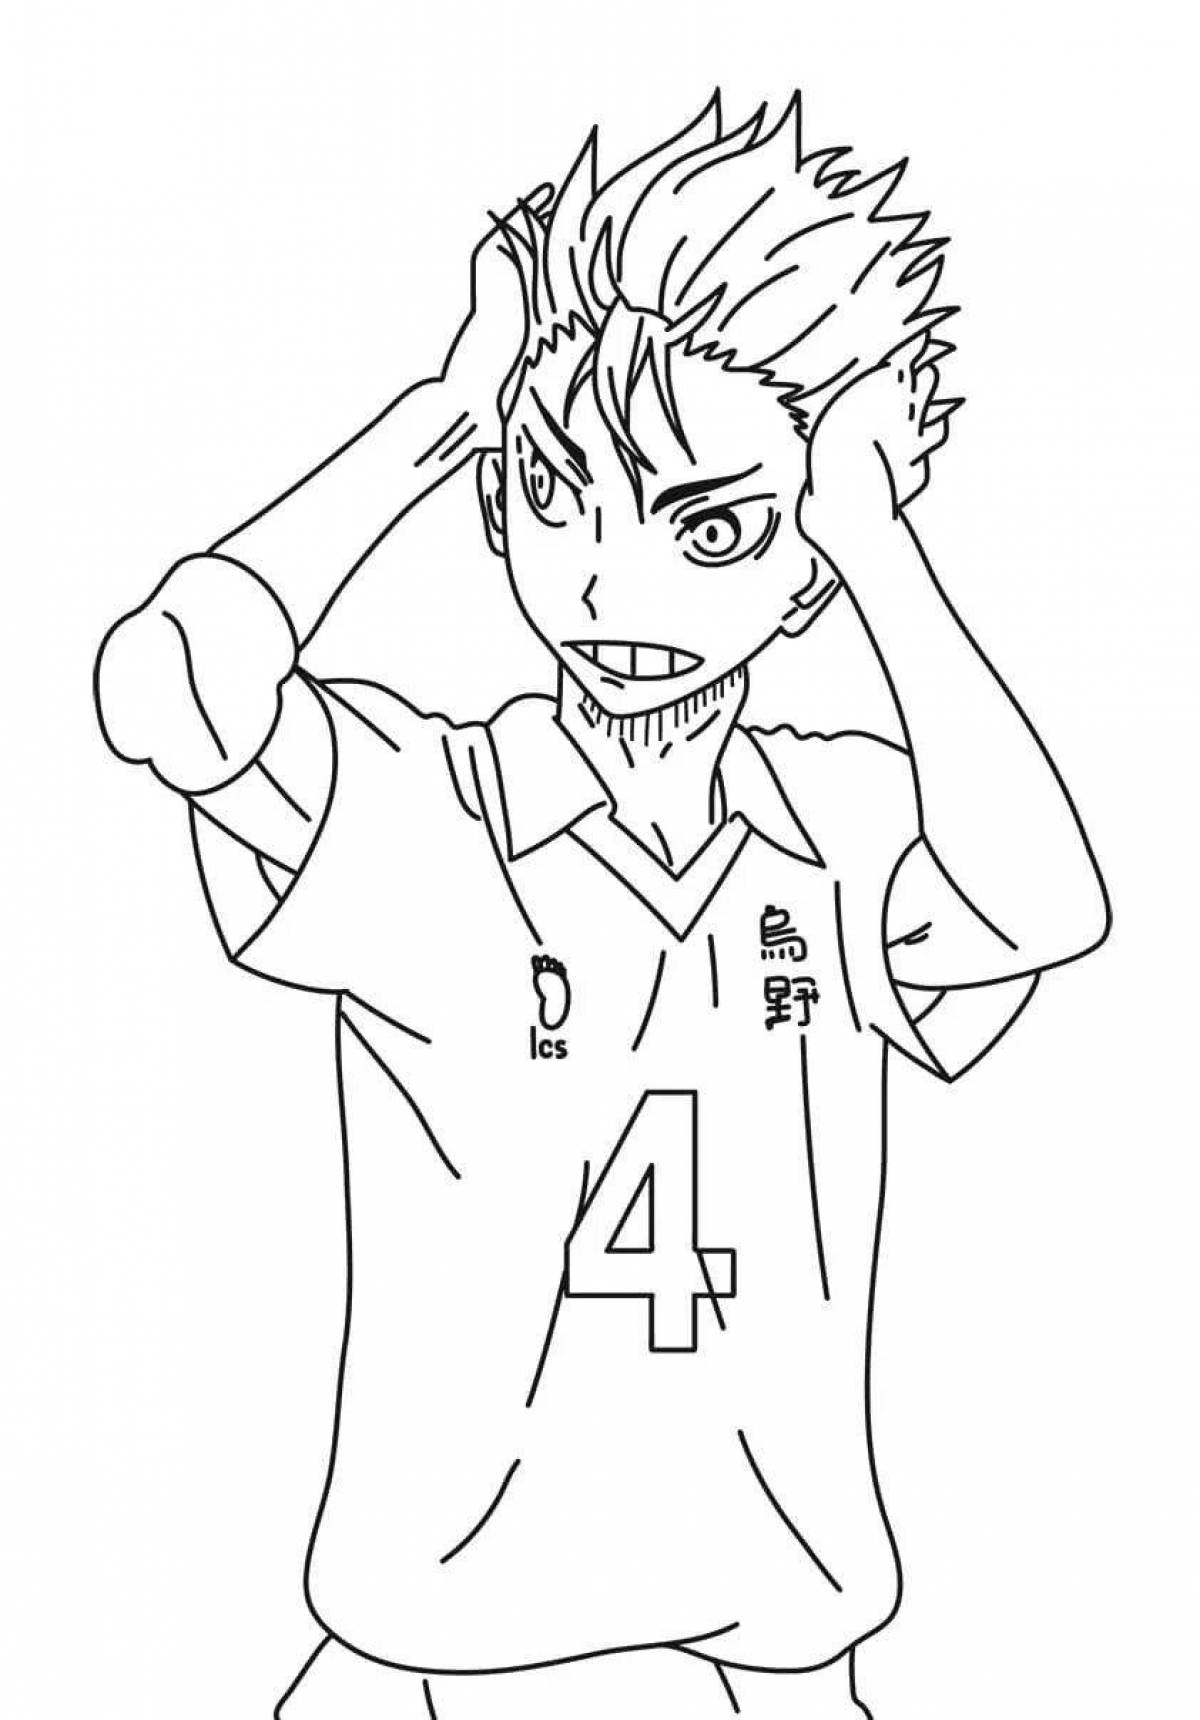 Coloring book funny chibi anime volleyball